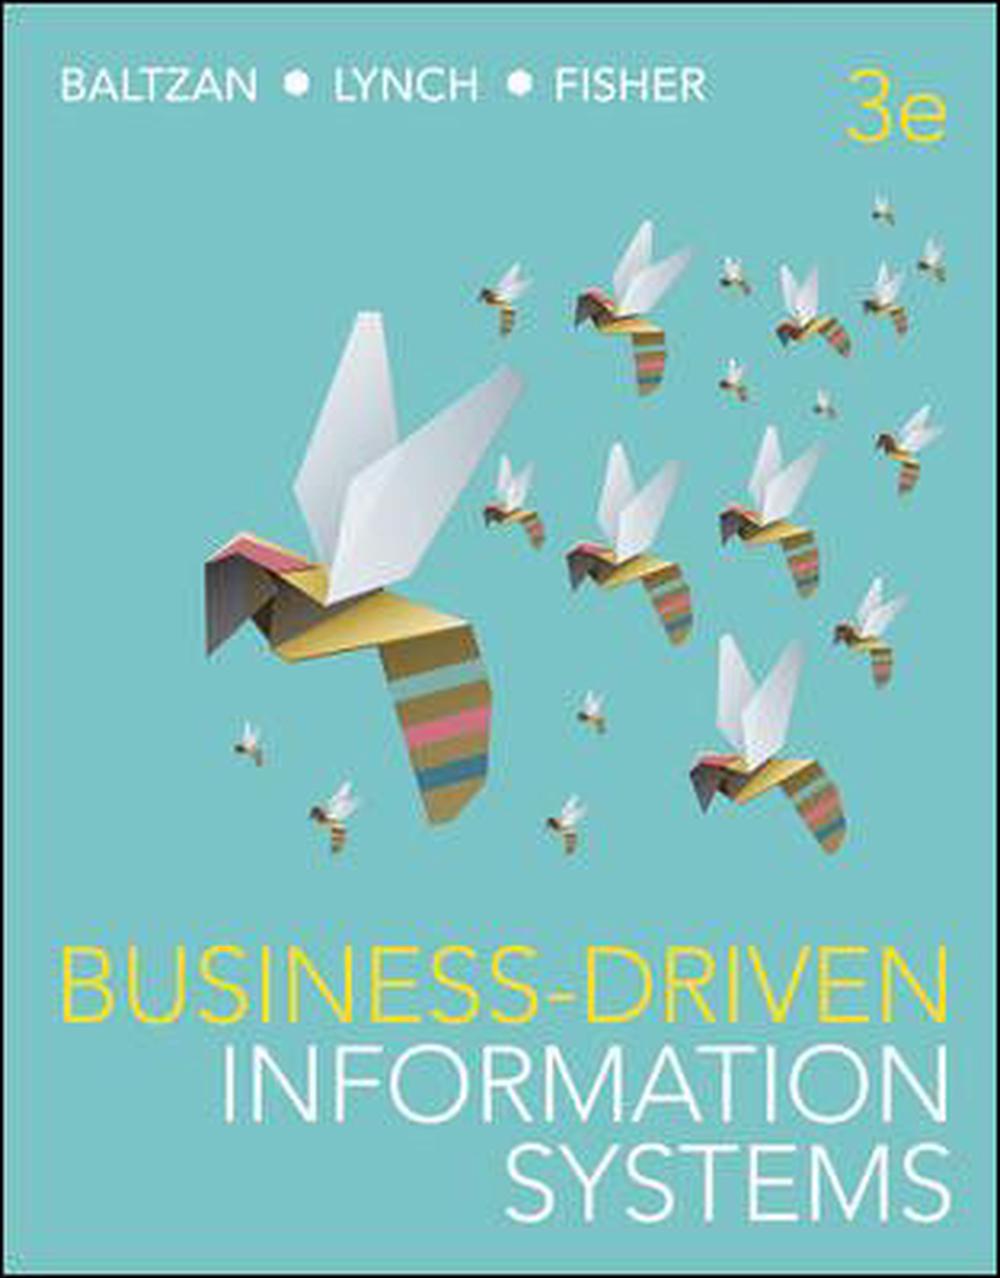 Pack Business Driven Information Systems, 3rd Edition by Baltzan